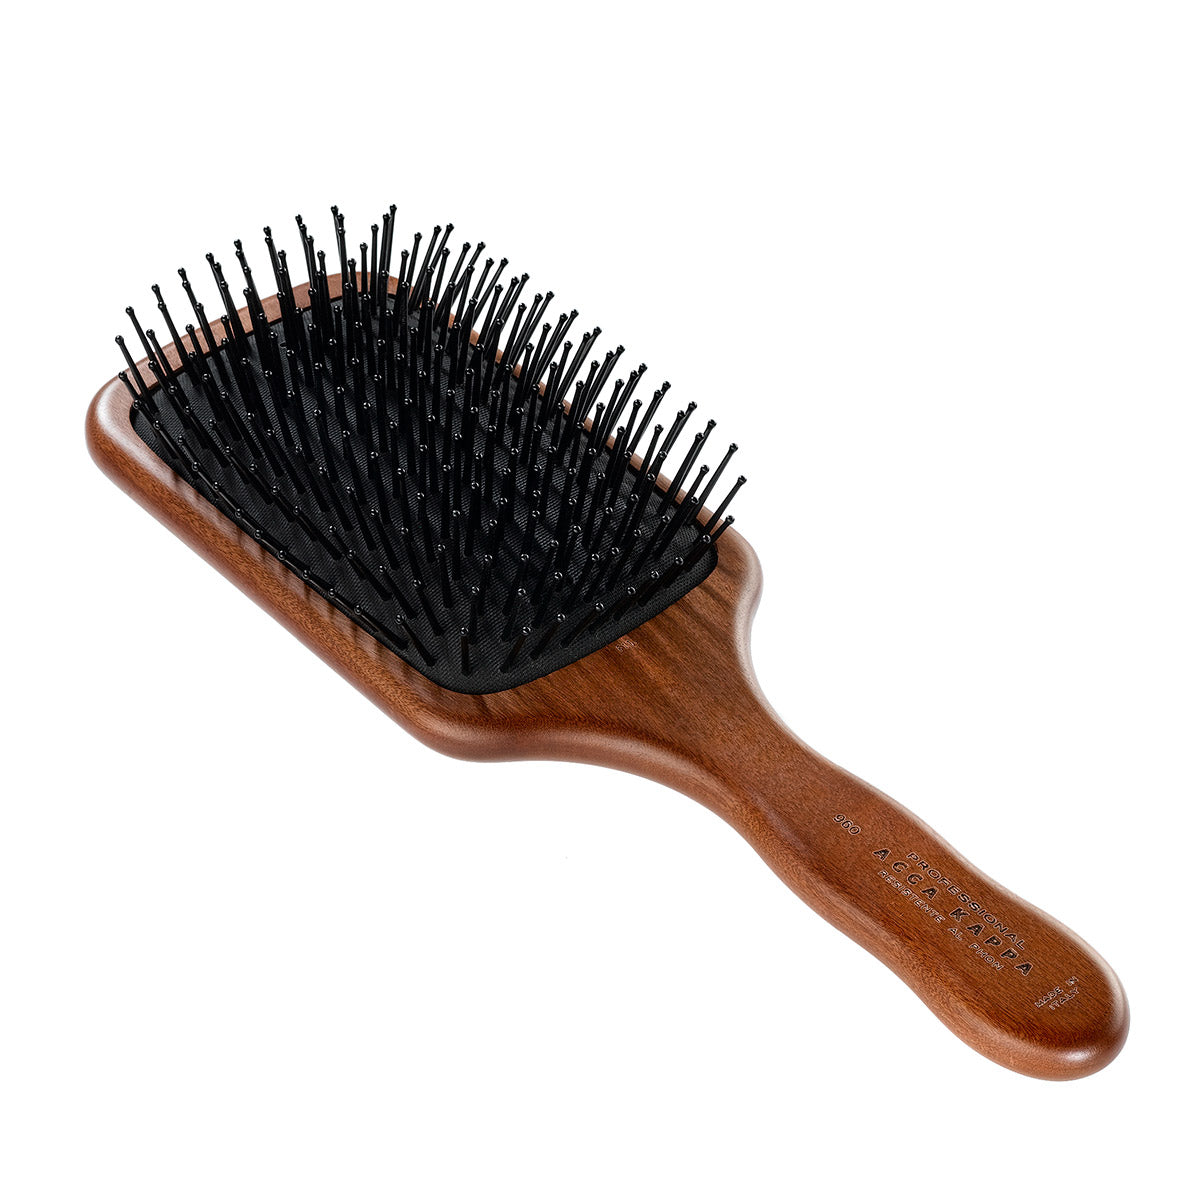 ACCA KAPPA Classic Paddle Brush with heat resistant nylon pins